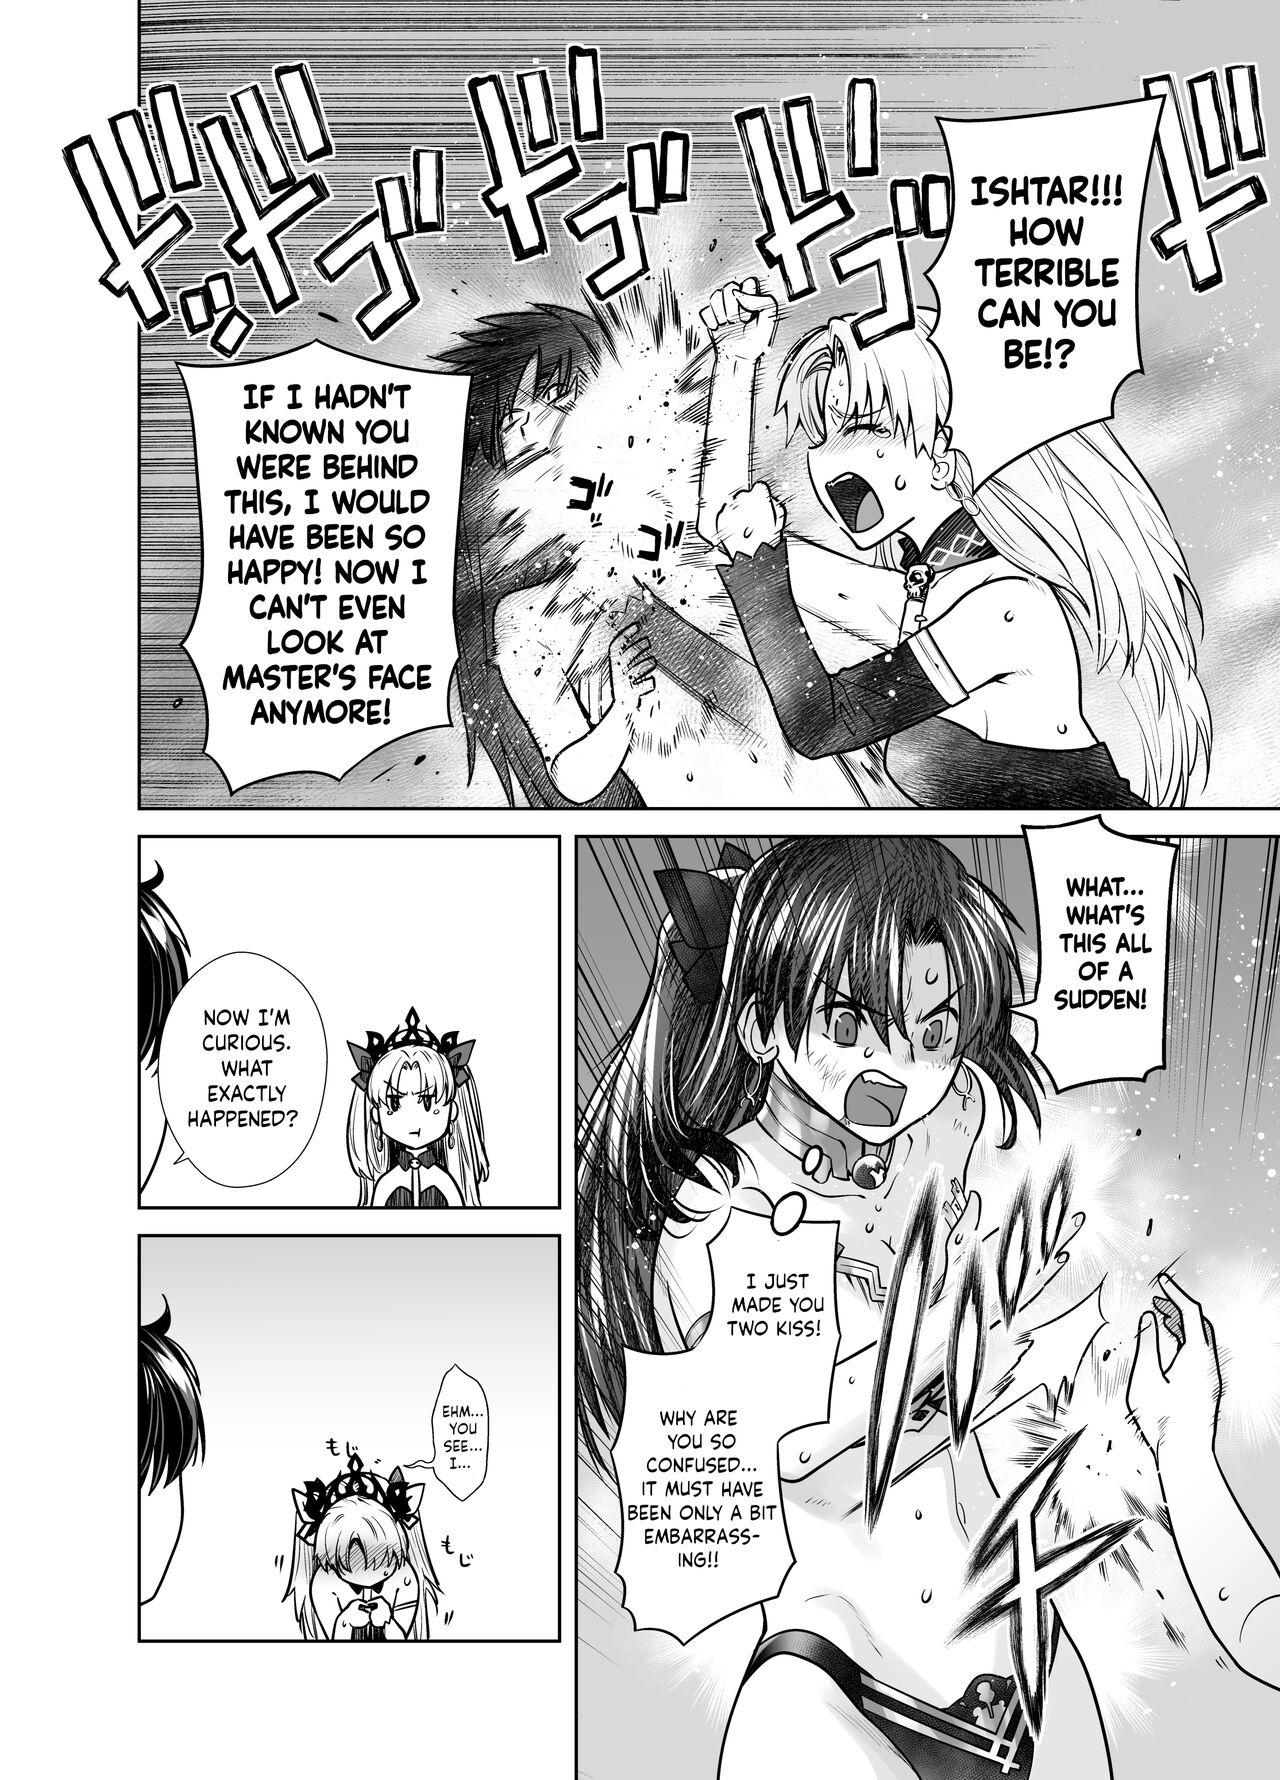 Muscular HEAVEN'S DRIVE 10 - Fate grand order France - Page 6